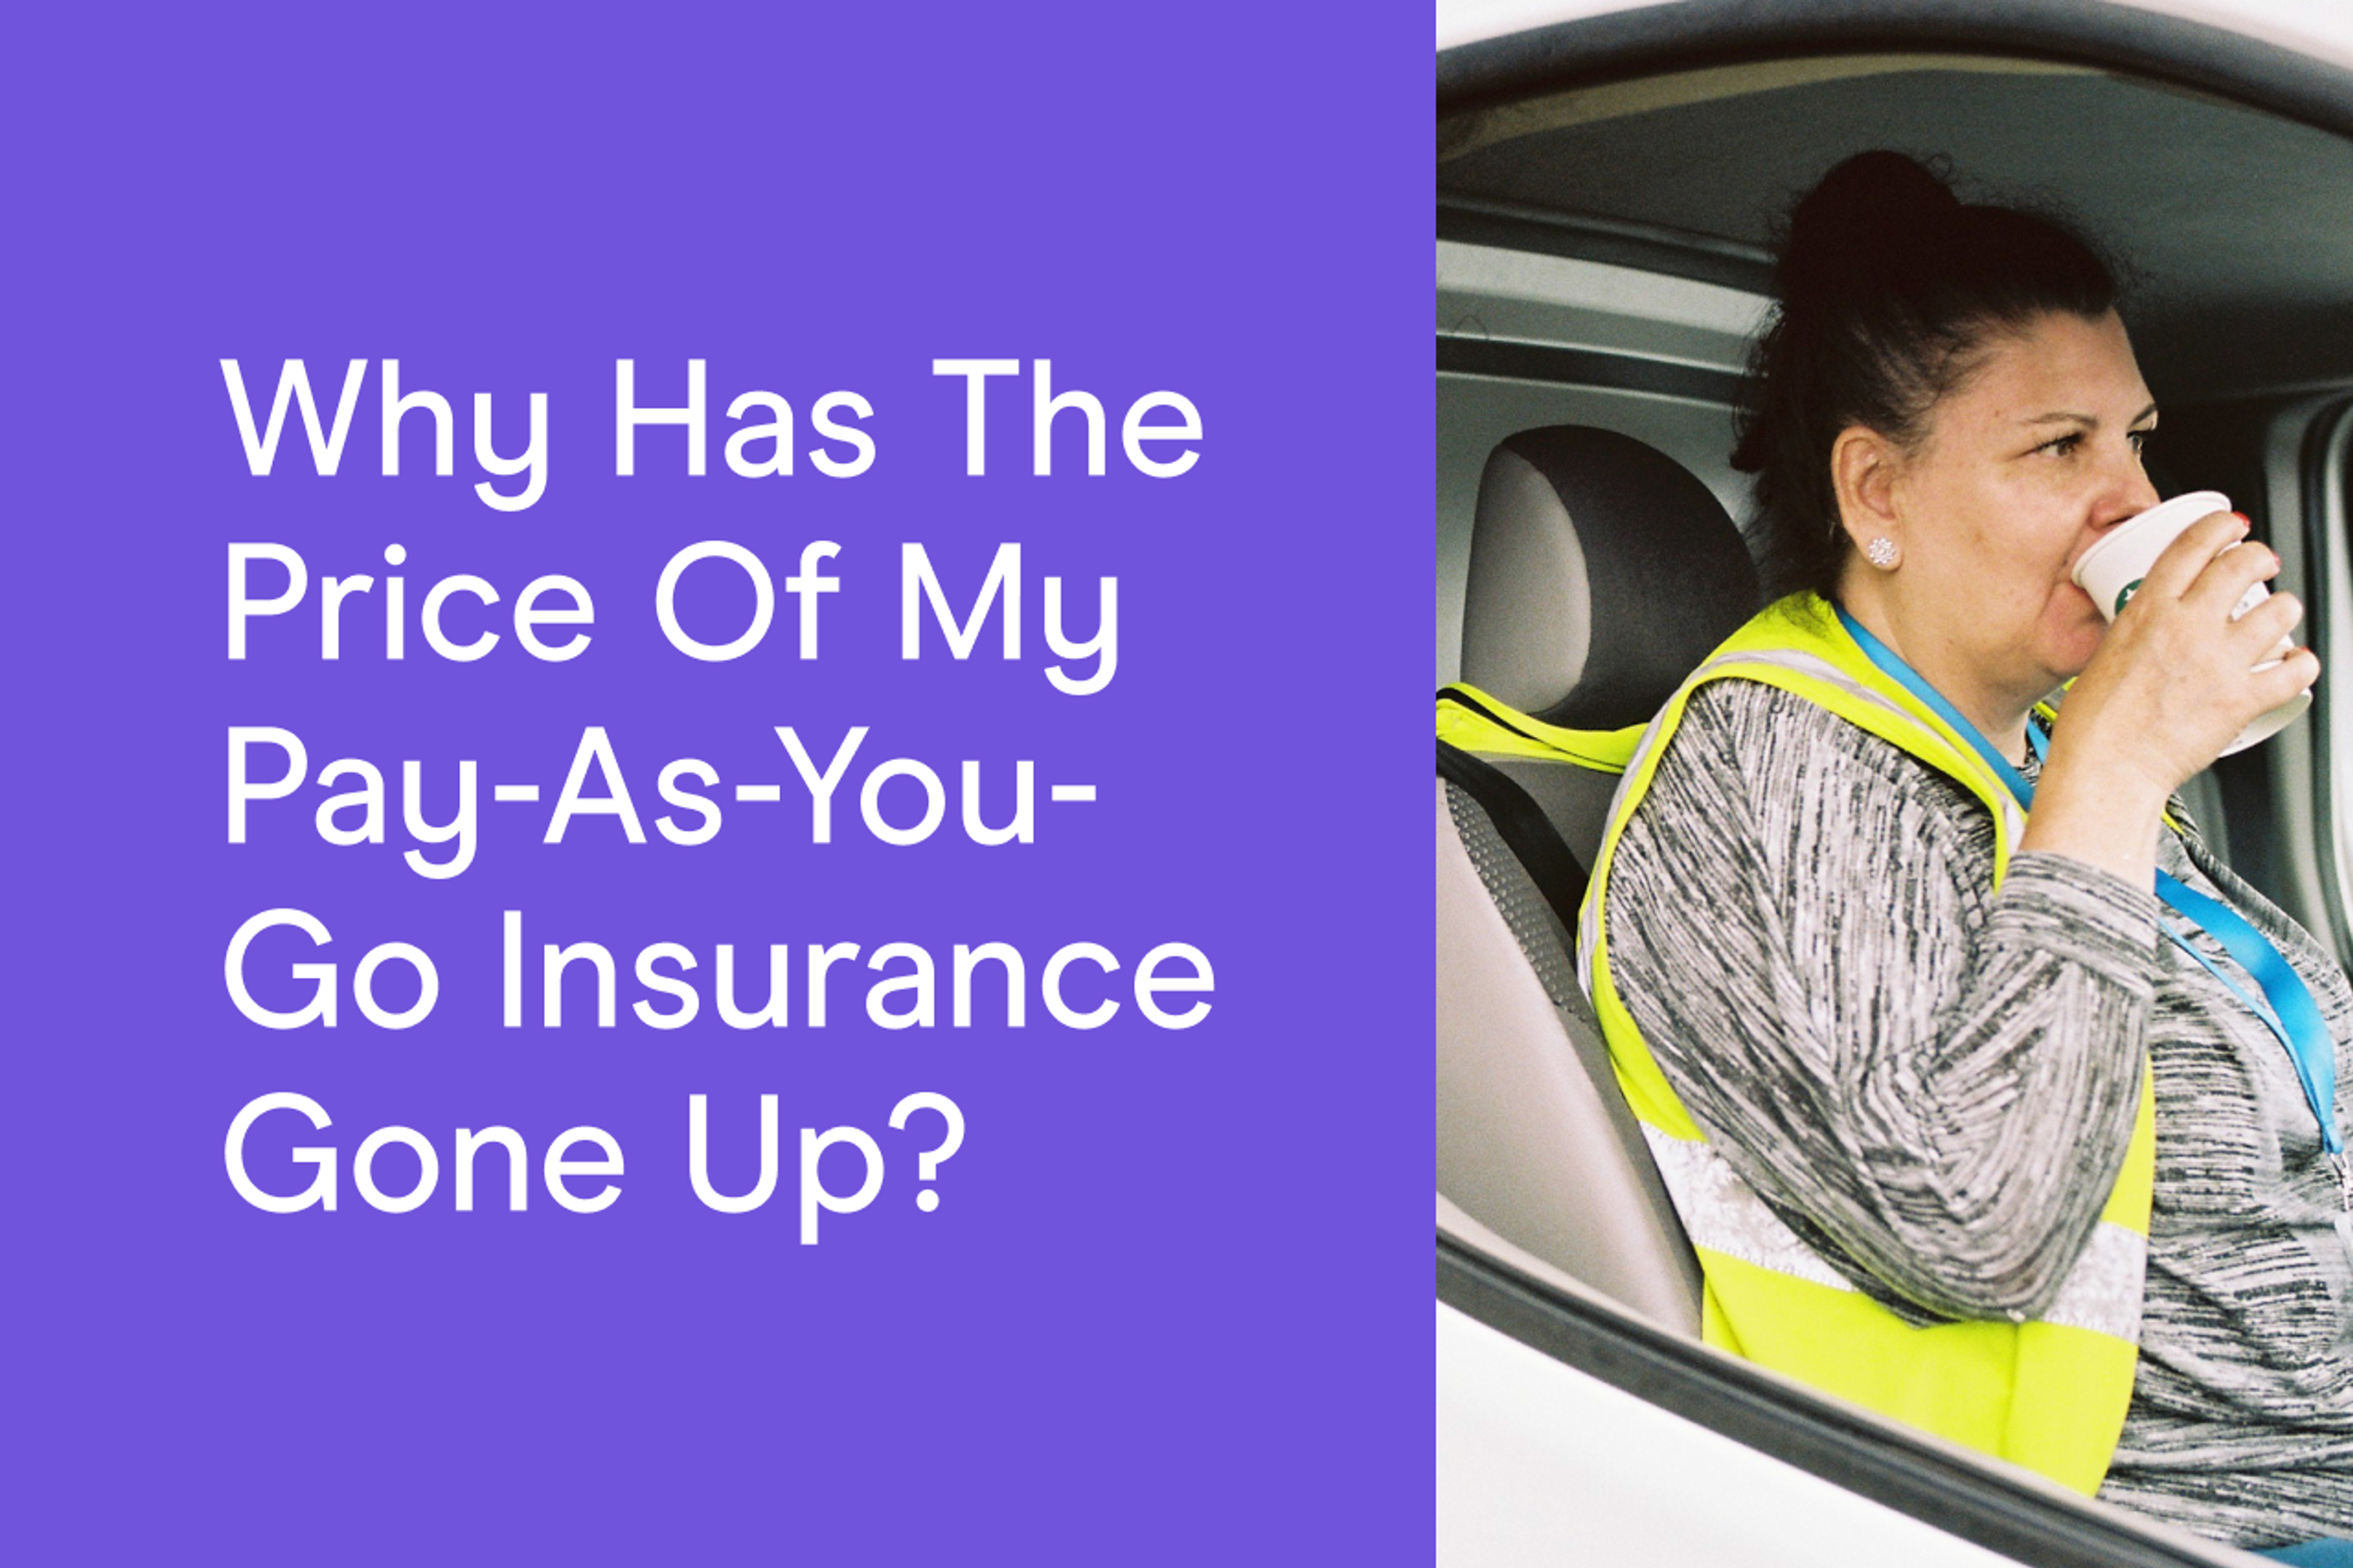 Why has the price of my pay-as-you-go insurance gone up?